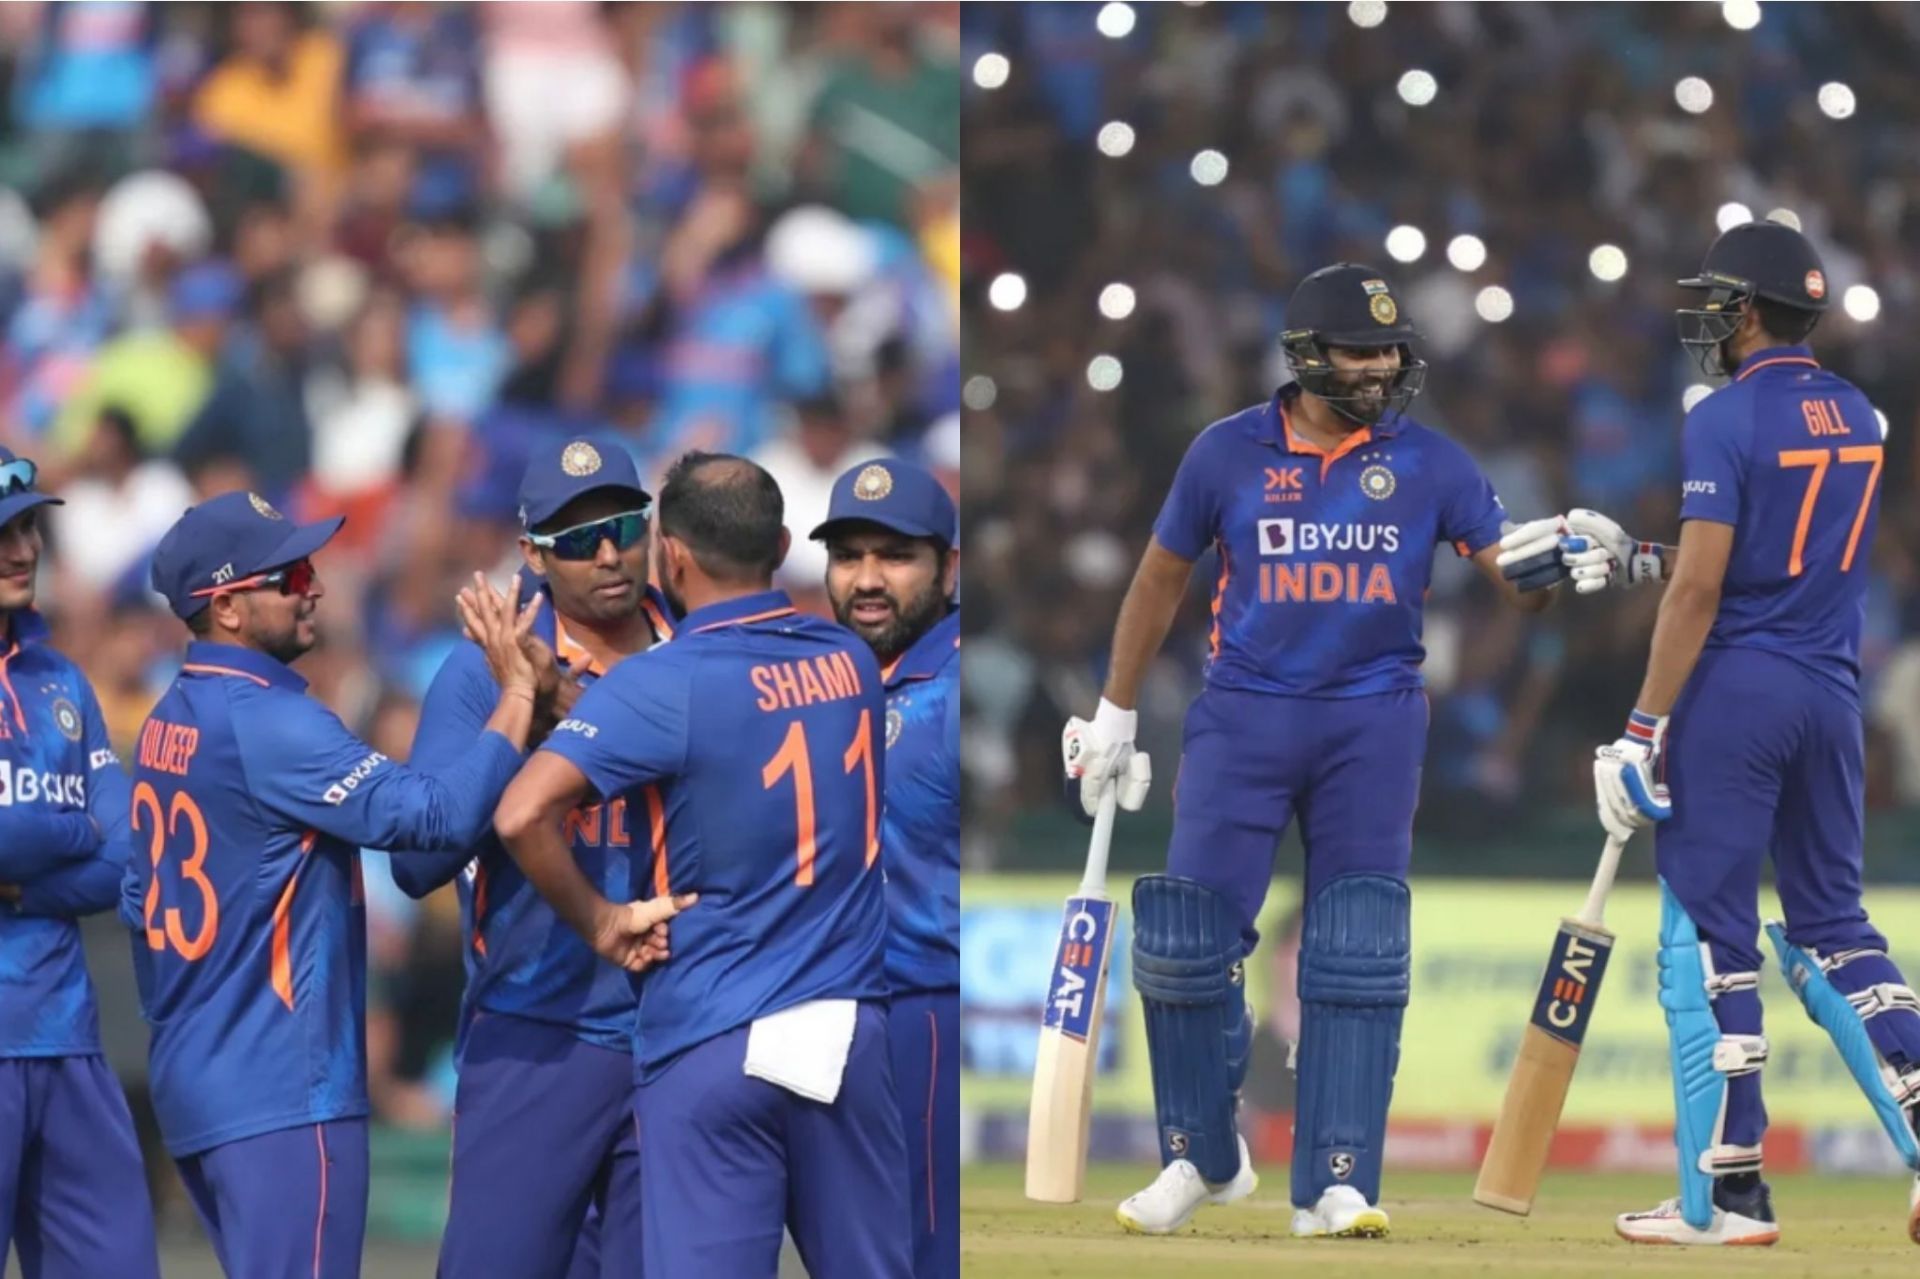 India defeated New Zealand in the 2nd ODI to win the series 